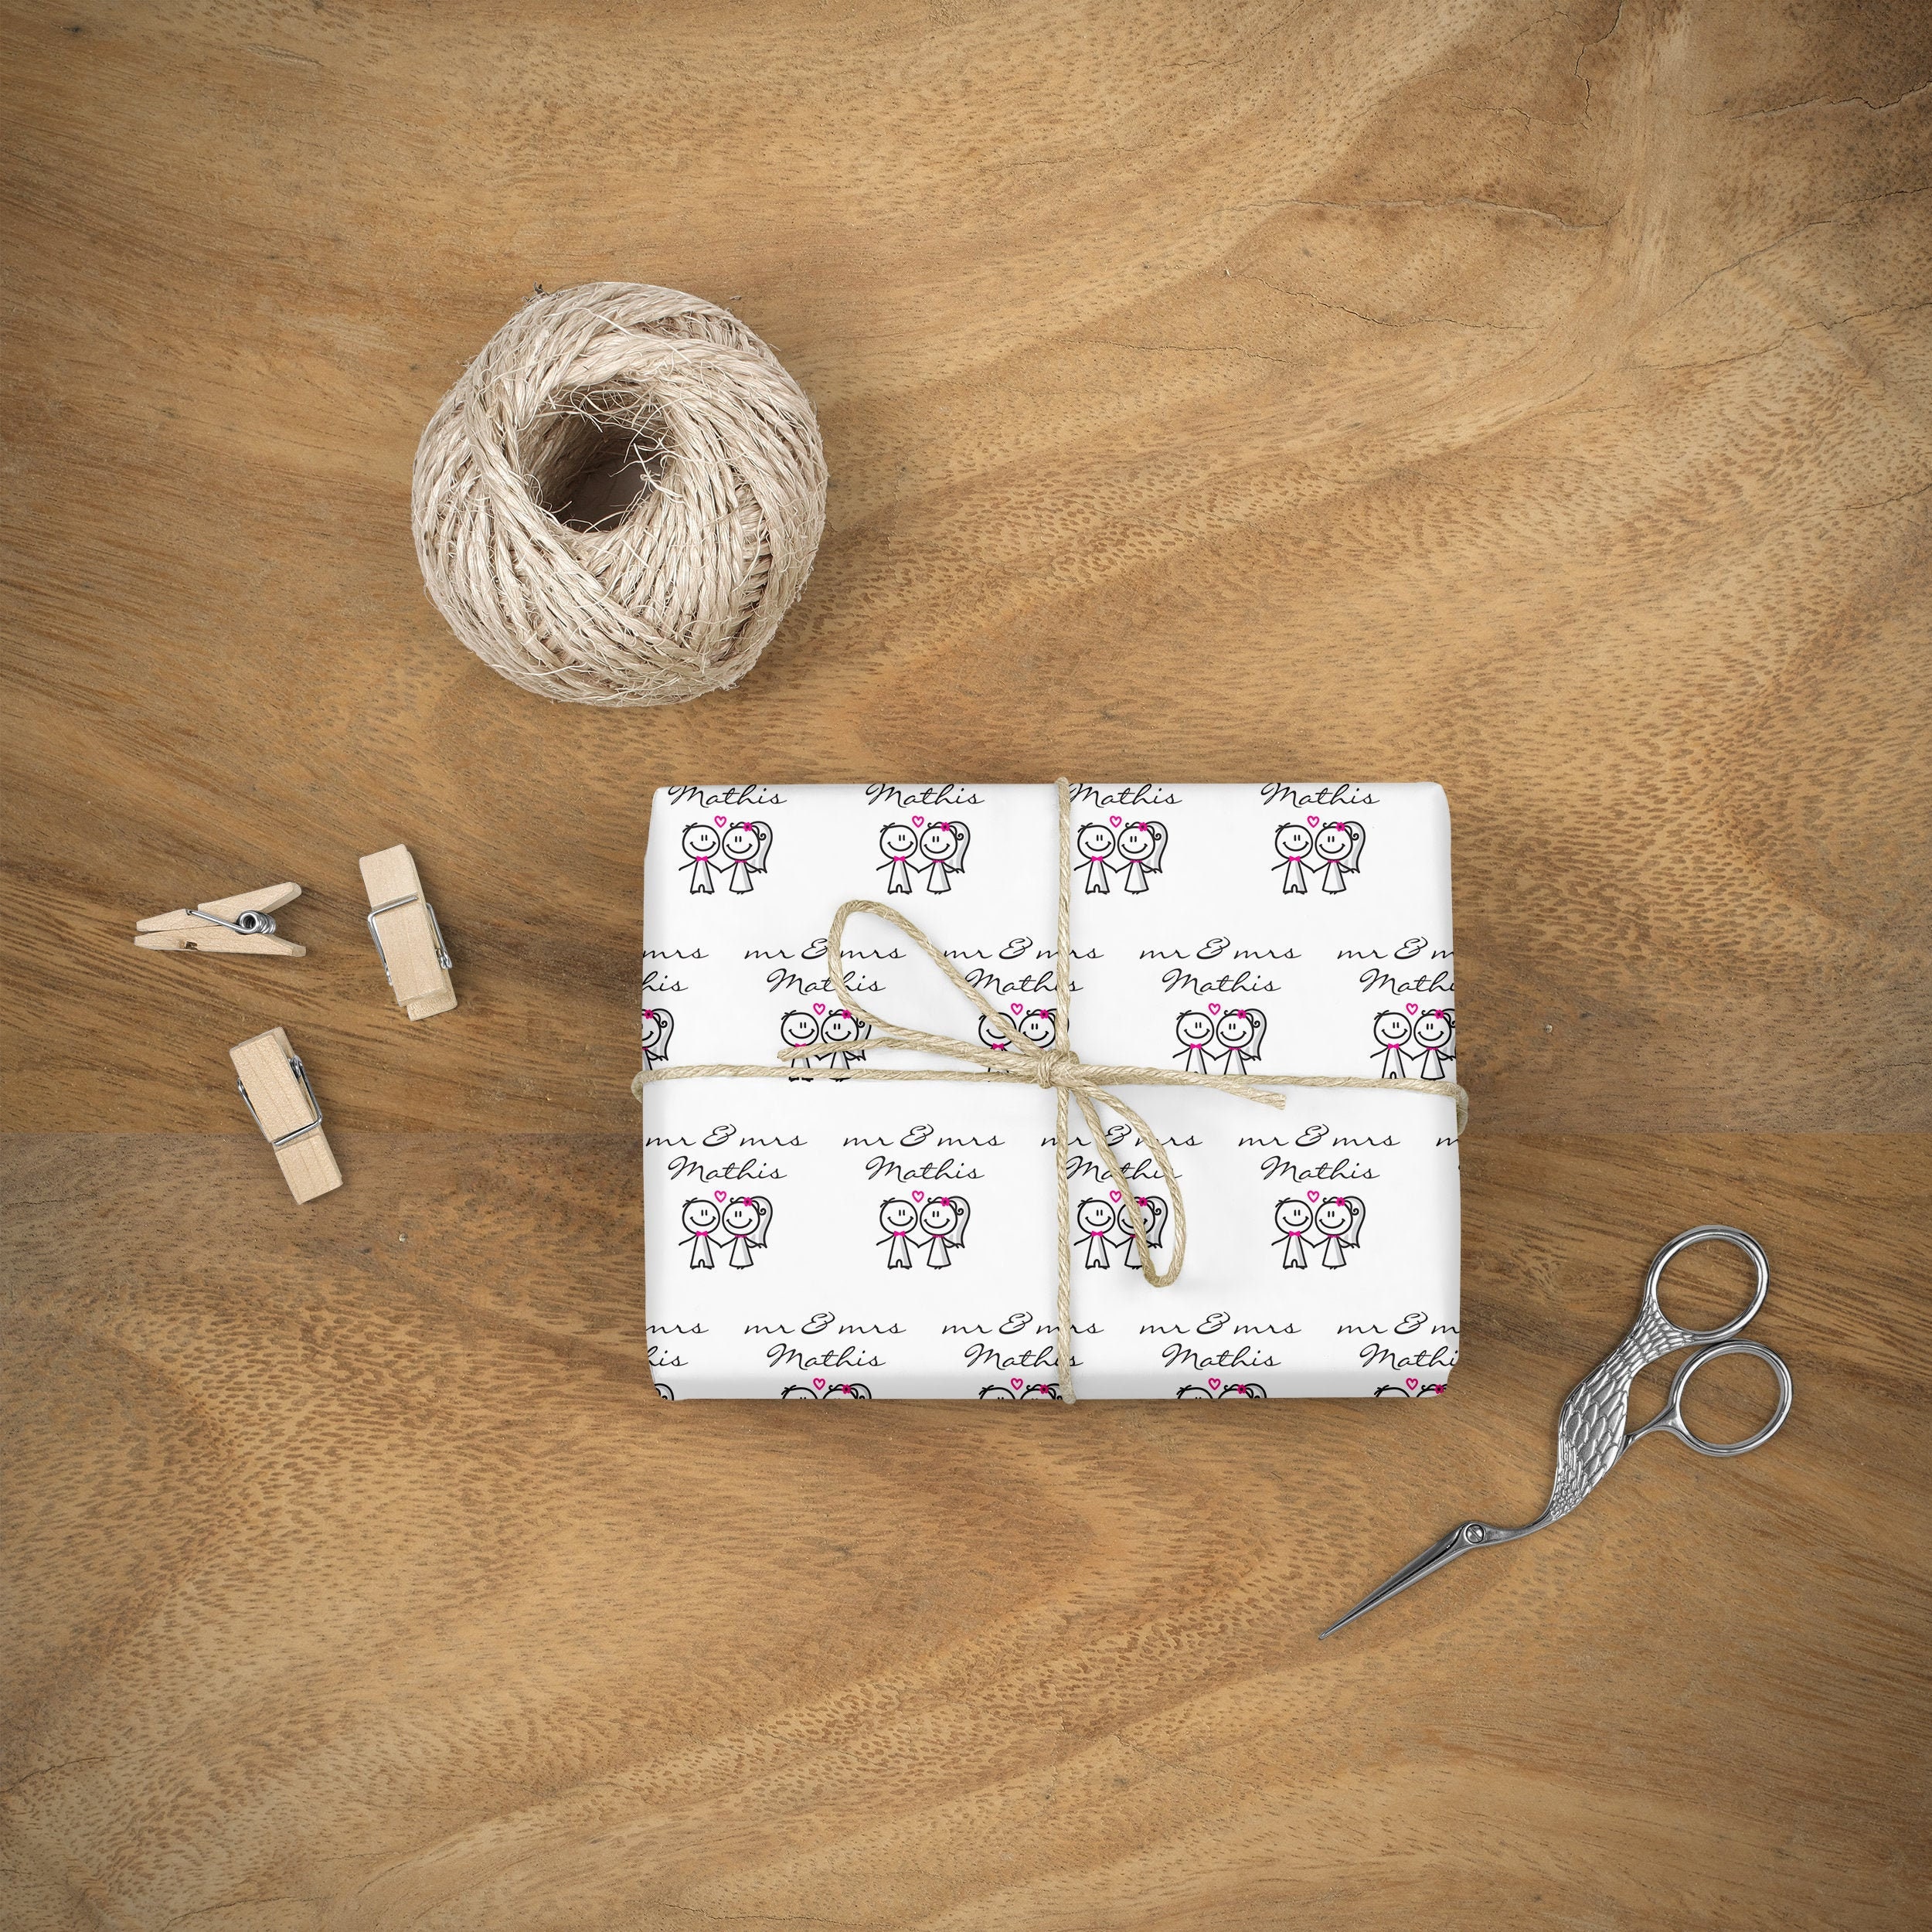 Mr. and Mrs. Wedding Black and White Premium Gift Wrap Wrapping Paper Roll